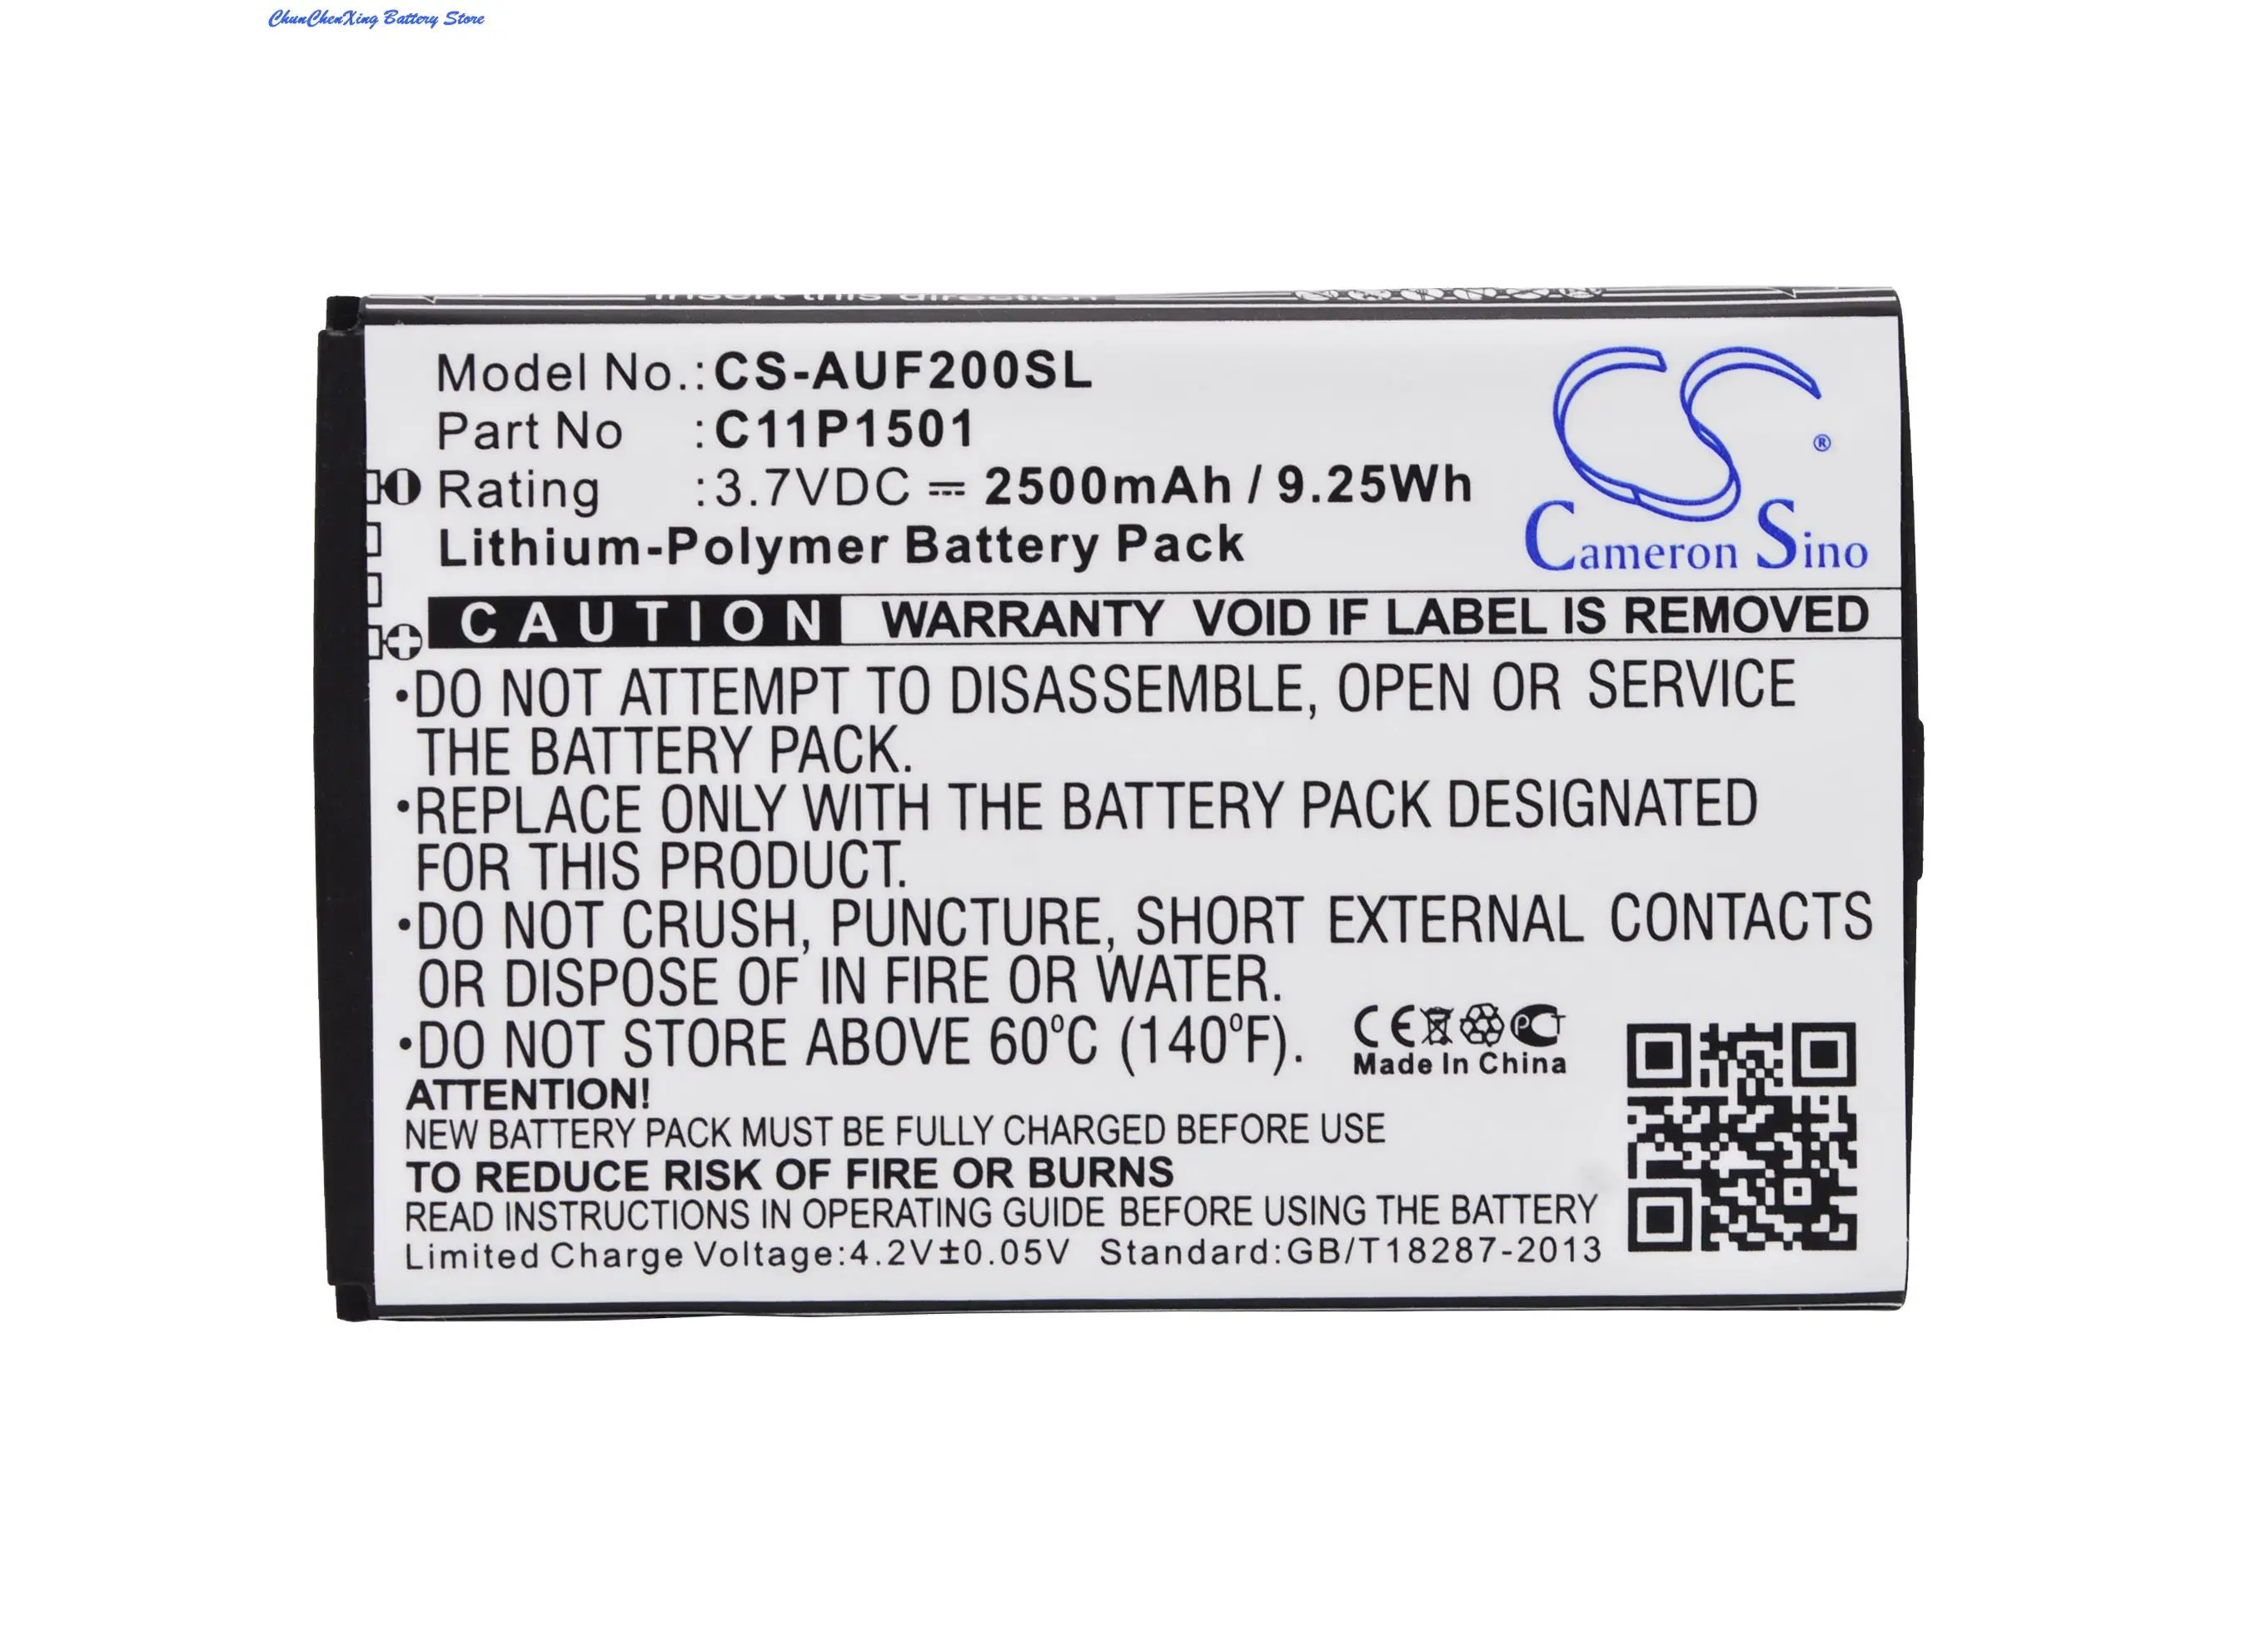 

GreenBattery High Quality Battery C11P1501 for Asus Z00D, Z00UD, Z011D, ZD551KL, ZE500CL, ZE551KL, ZE600KL, ZE601KL, ZenFone 2